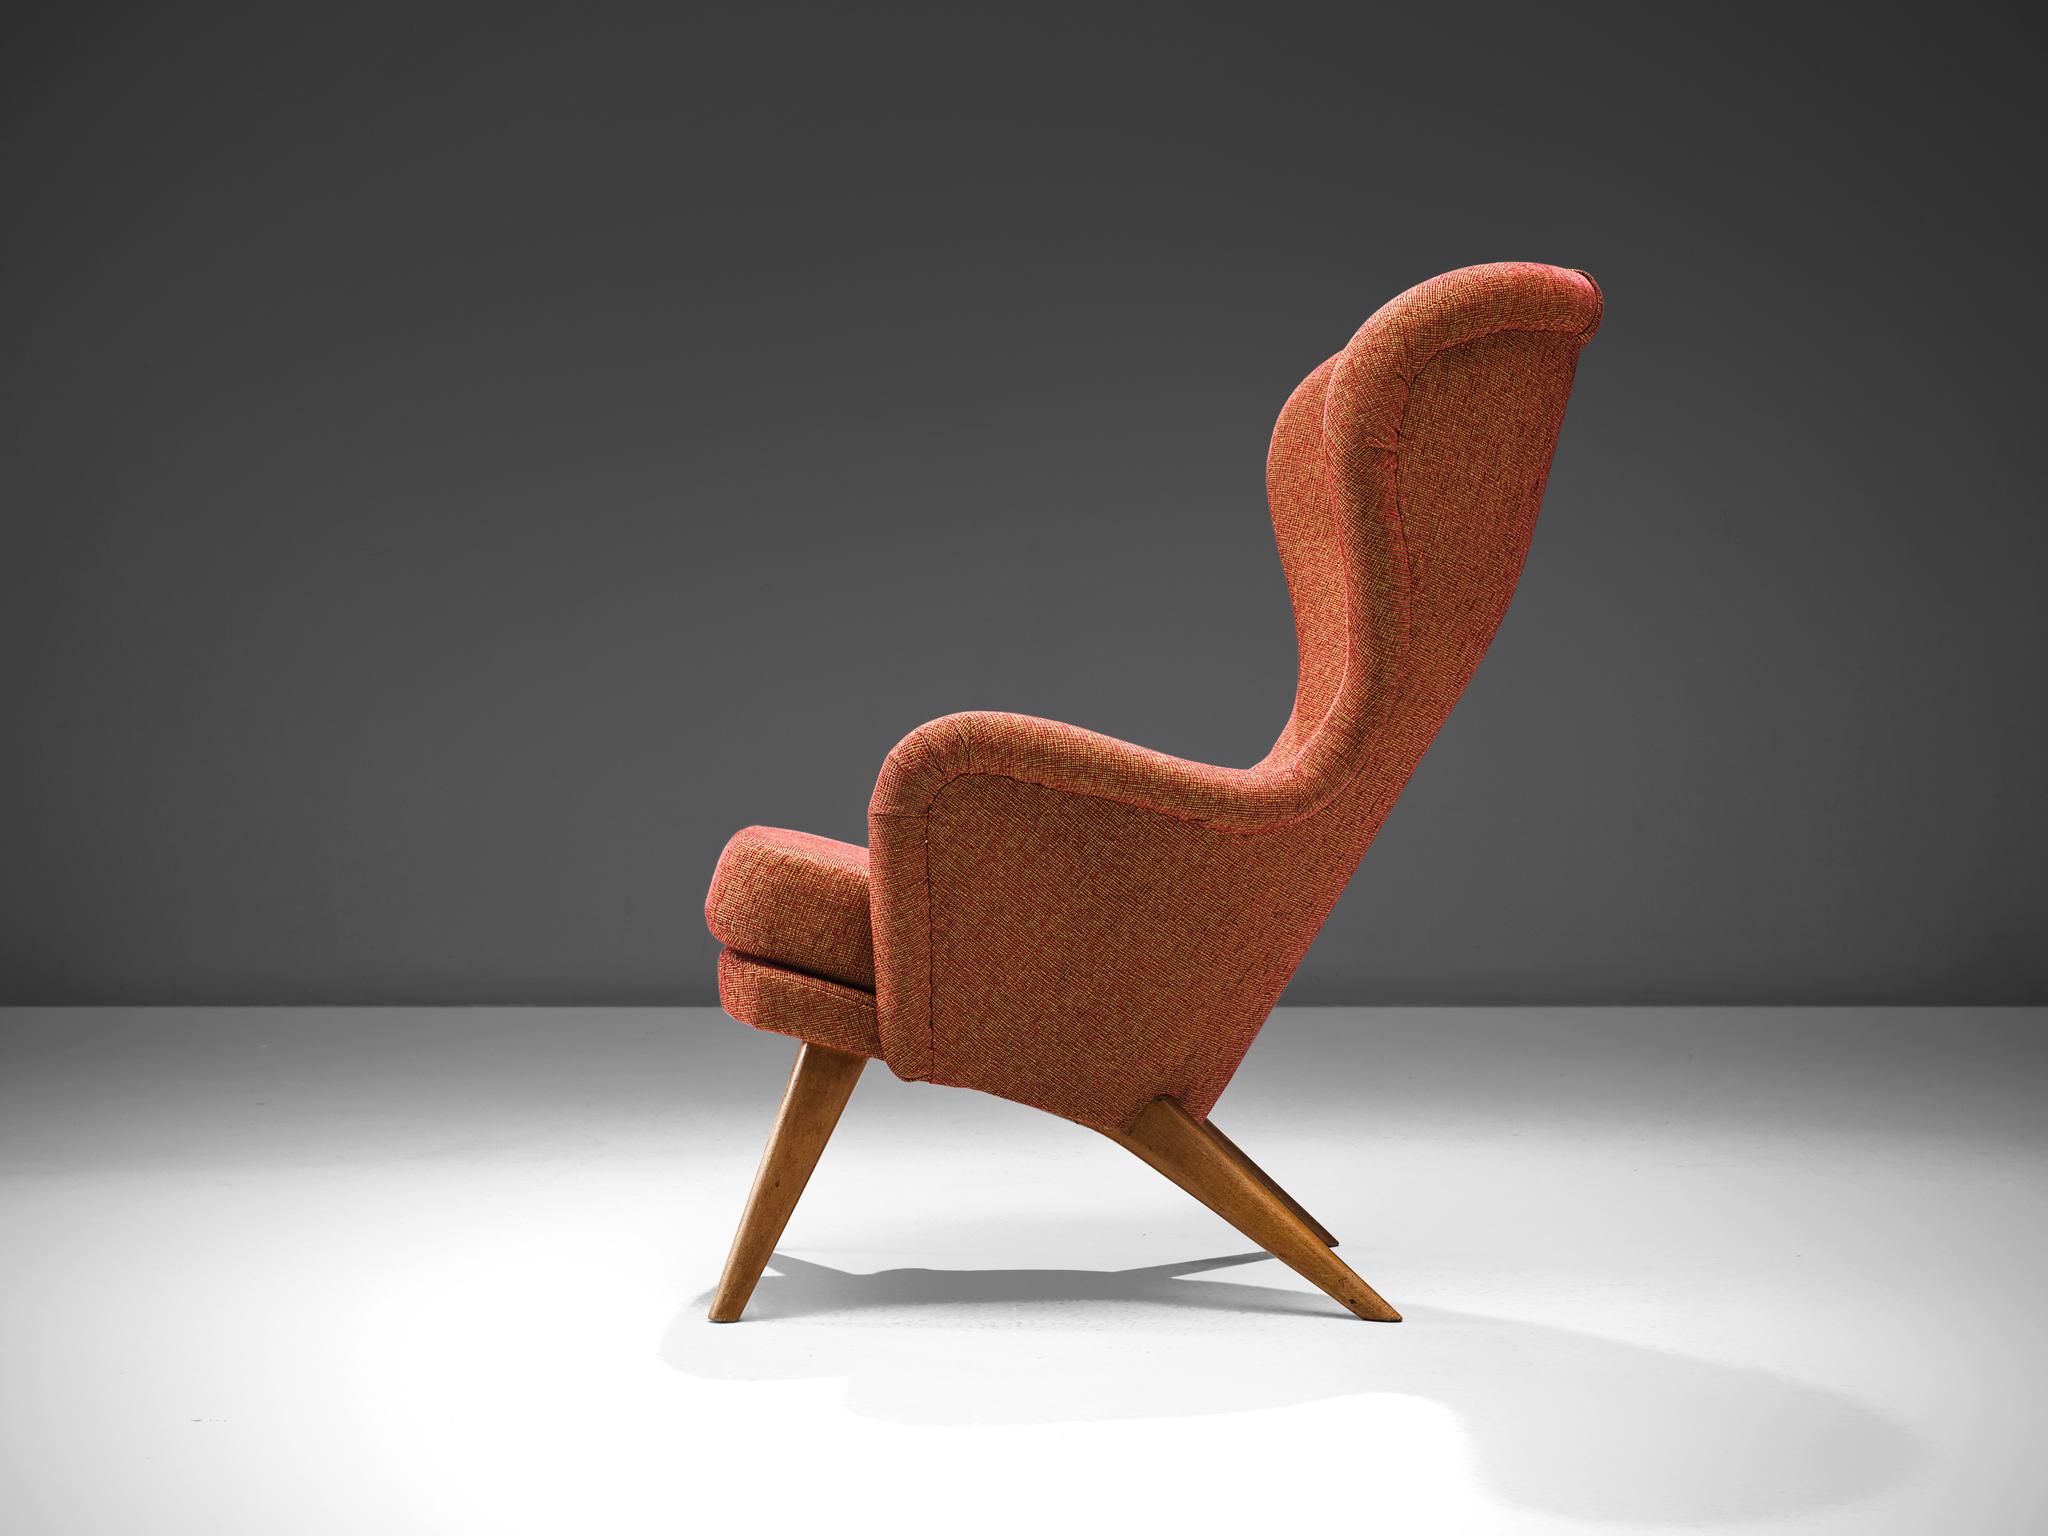 Carl Gustaf Hiort for Puunveisto Oy - Träsnideri Ab, 'Siesta' lounge chair, fabric, oak, Finland, design 1952, production later.

This sensuous armchair has a curved, slender seat with a slightly winged back. The chair leans slightly backwards and